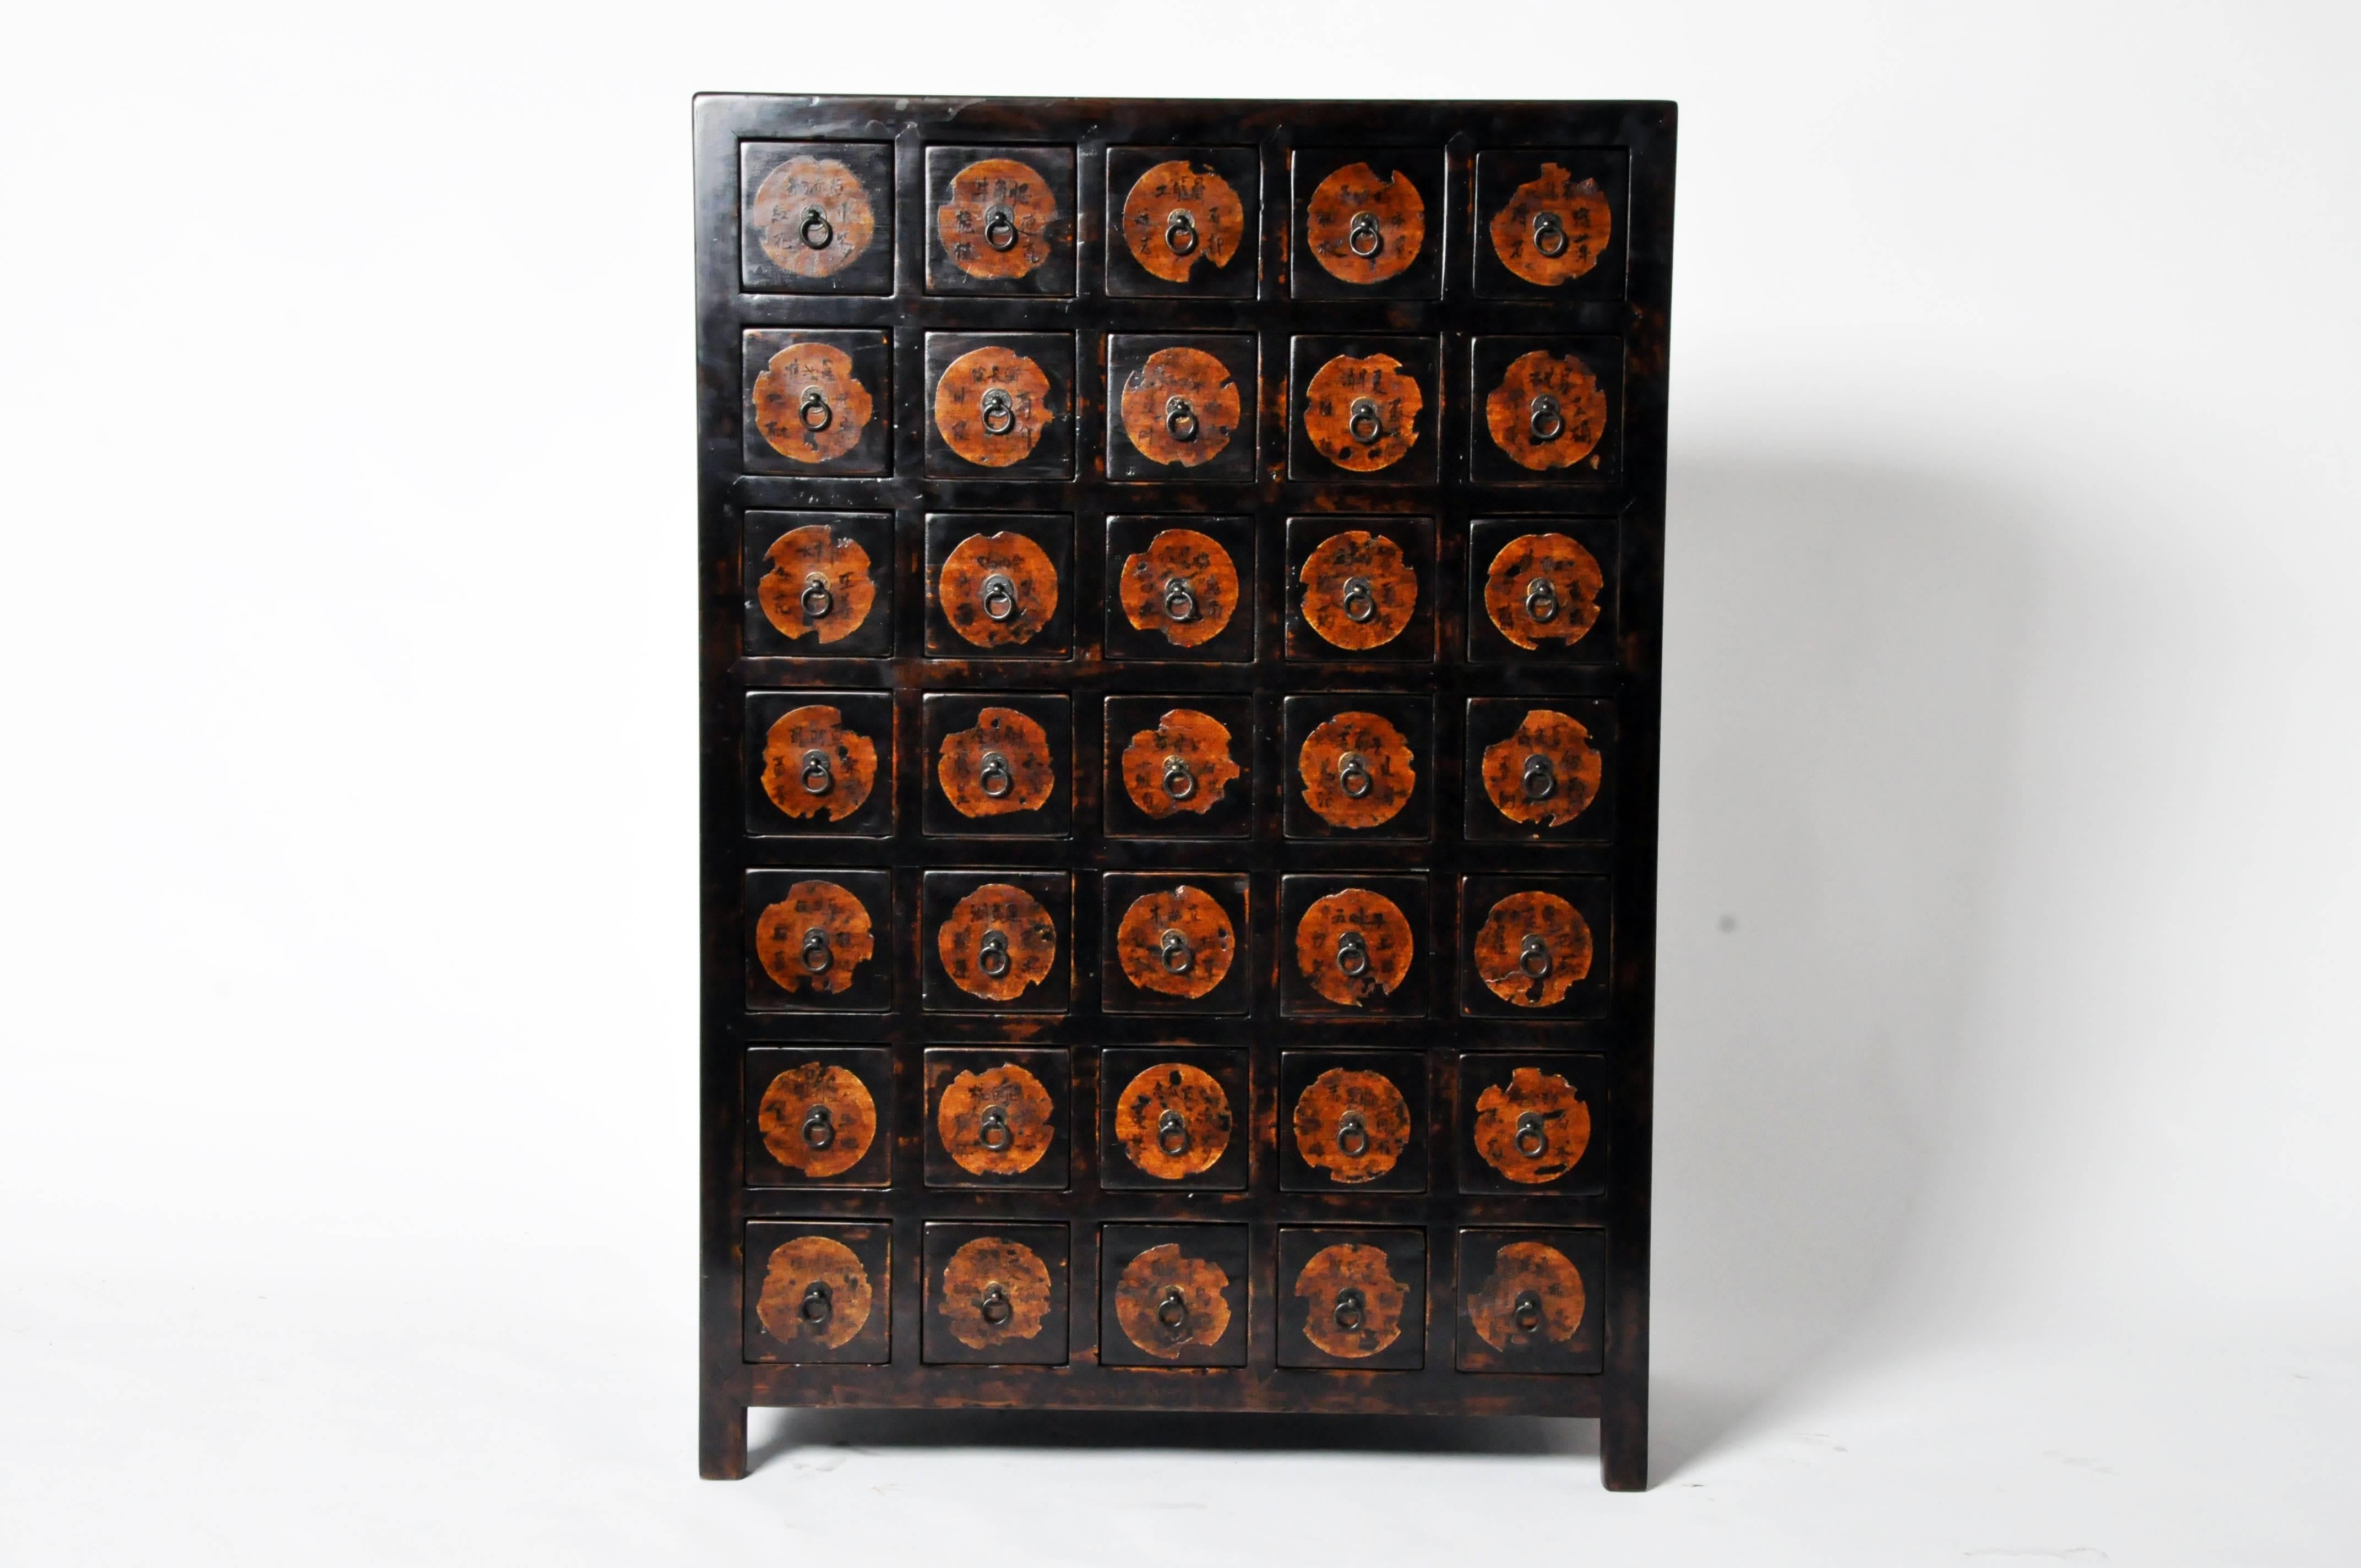 This handsome medicine chest has a rich dark lacquer throughout; each of the 35 drawers has a metal ring pull handle and is labeled with elegant calligraphy indicating the original contents of each, which kept herbs and spices organized. Constructed